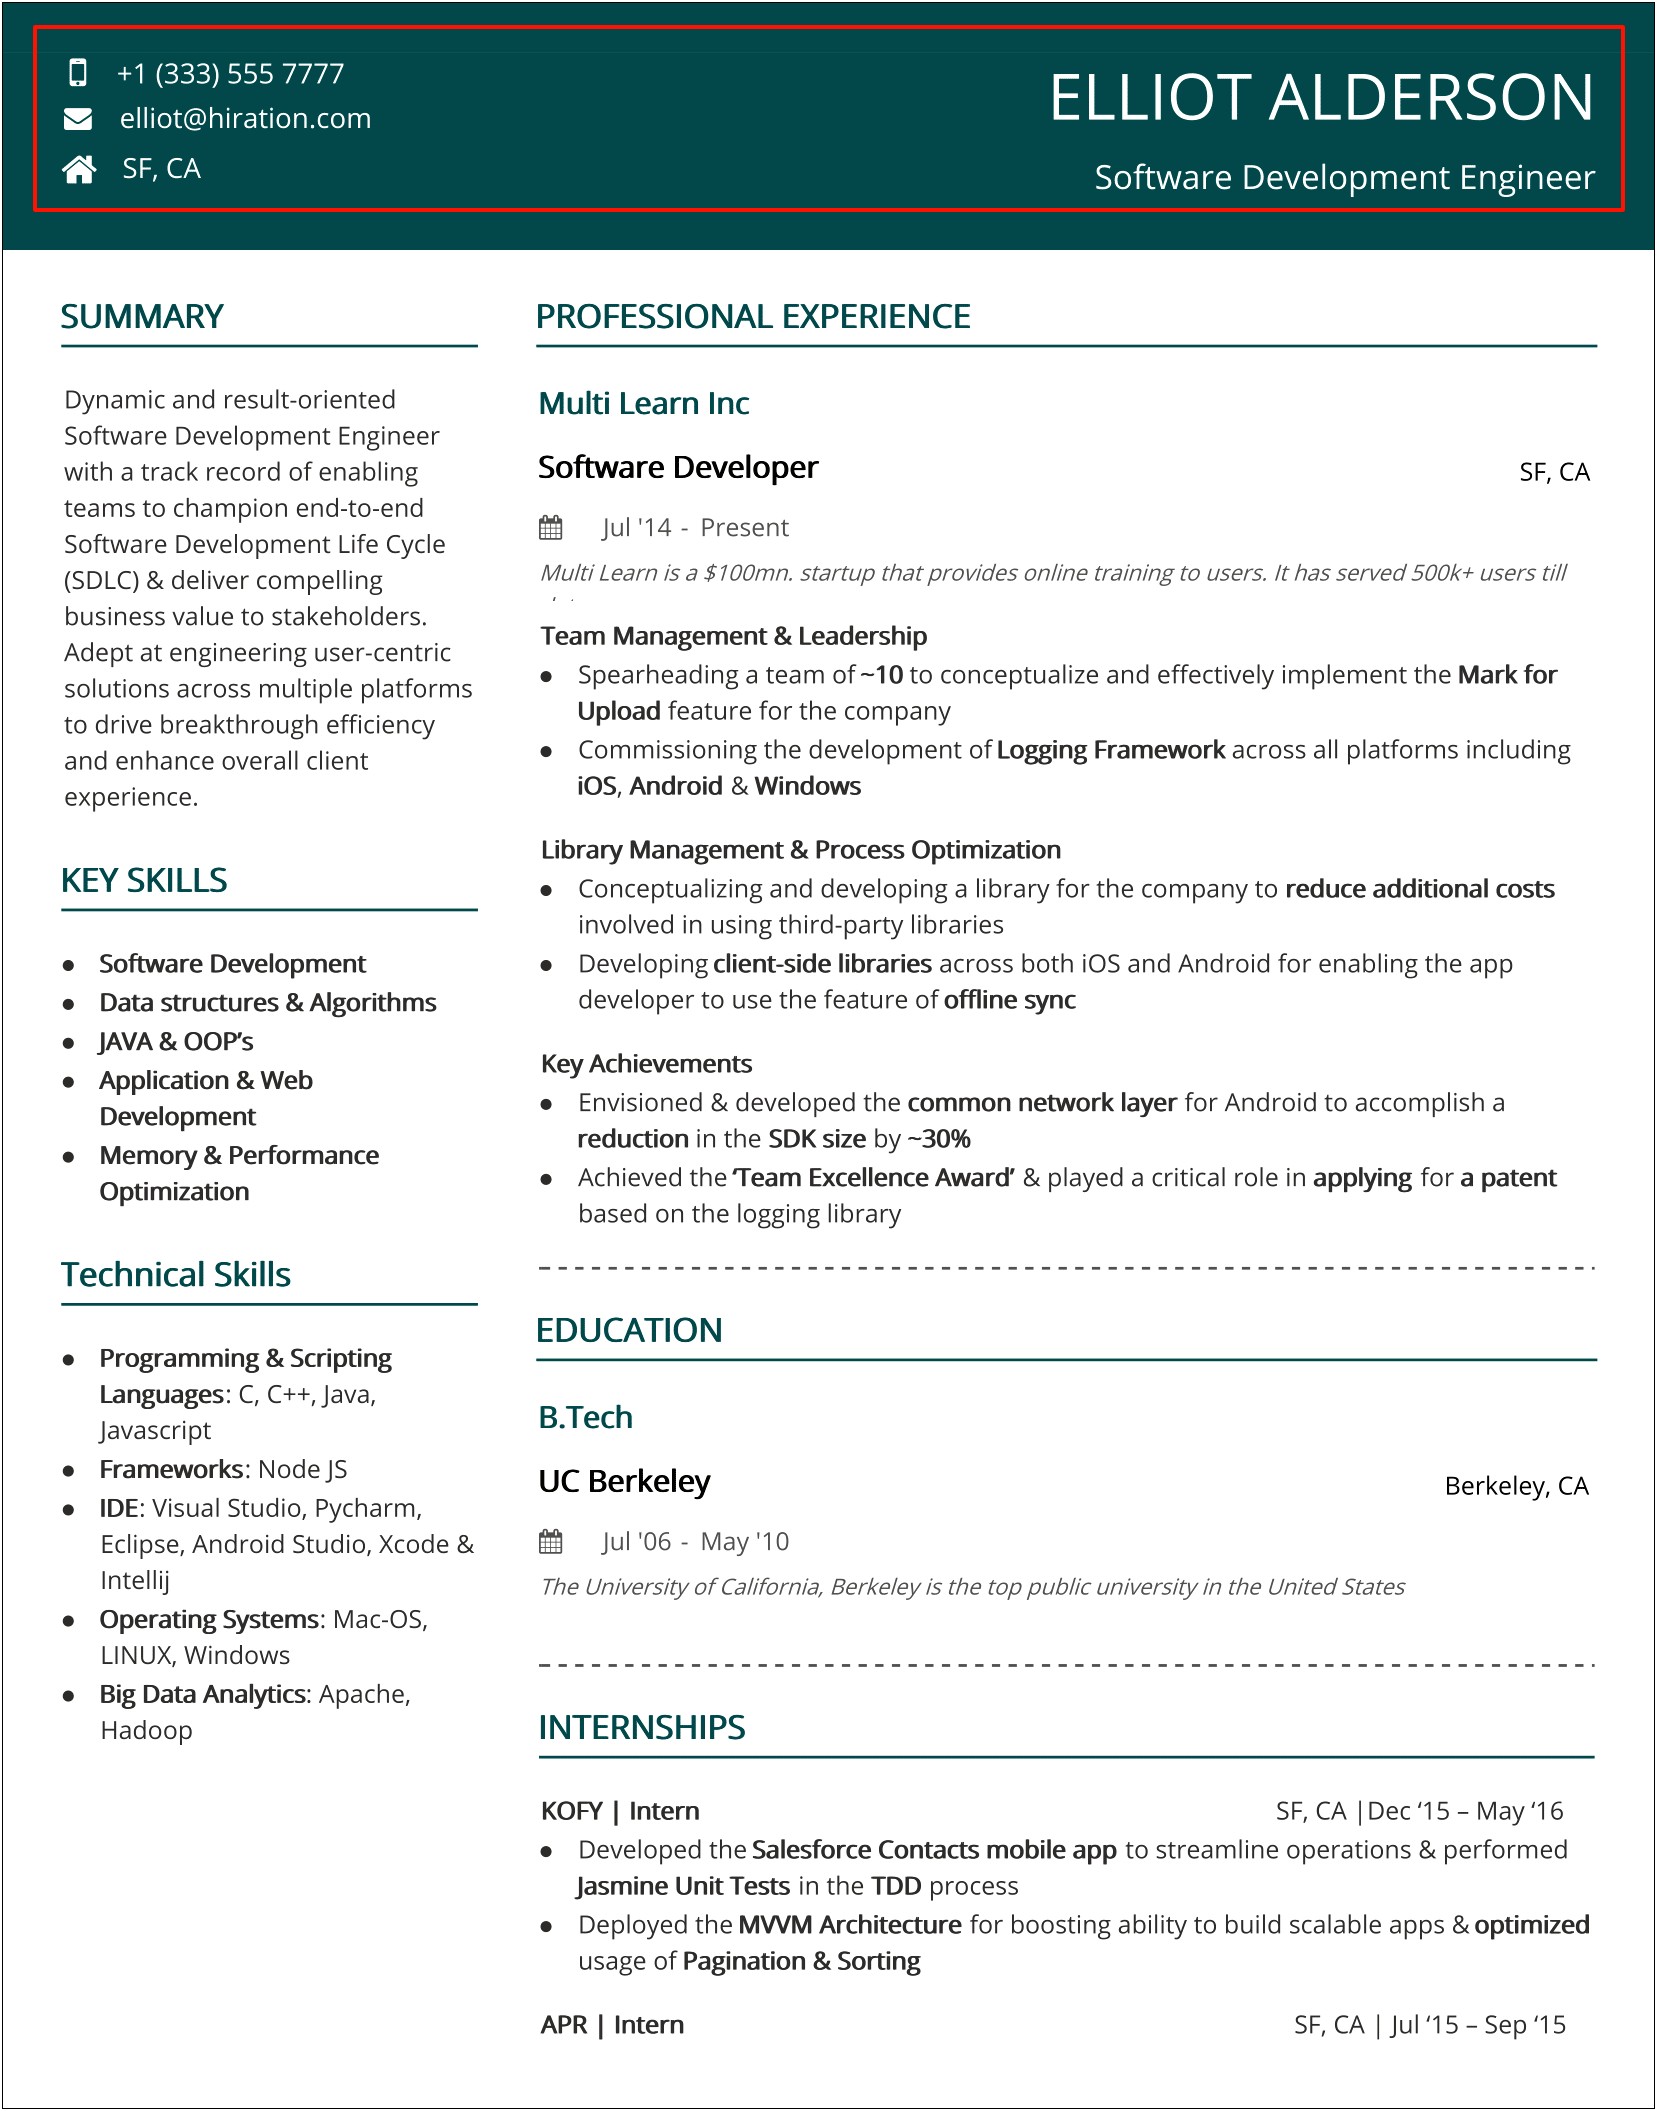 Resume Header For Someone Without Much Experience